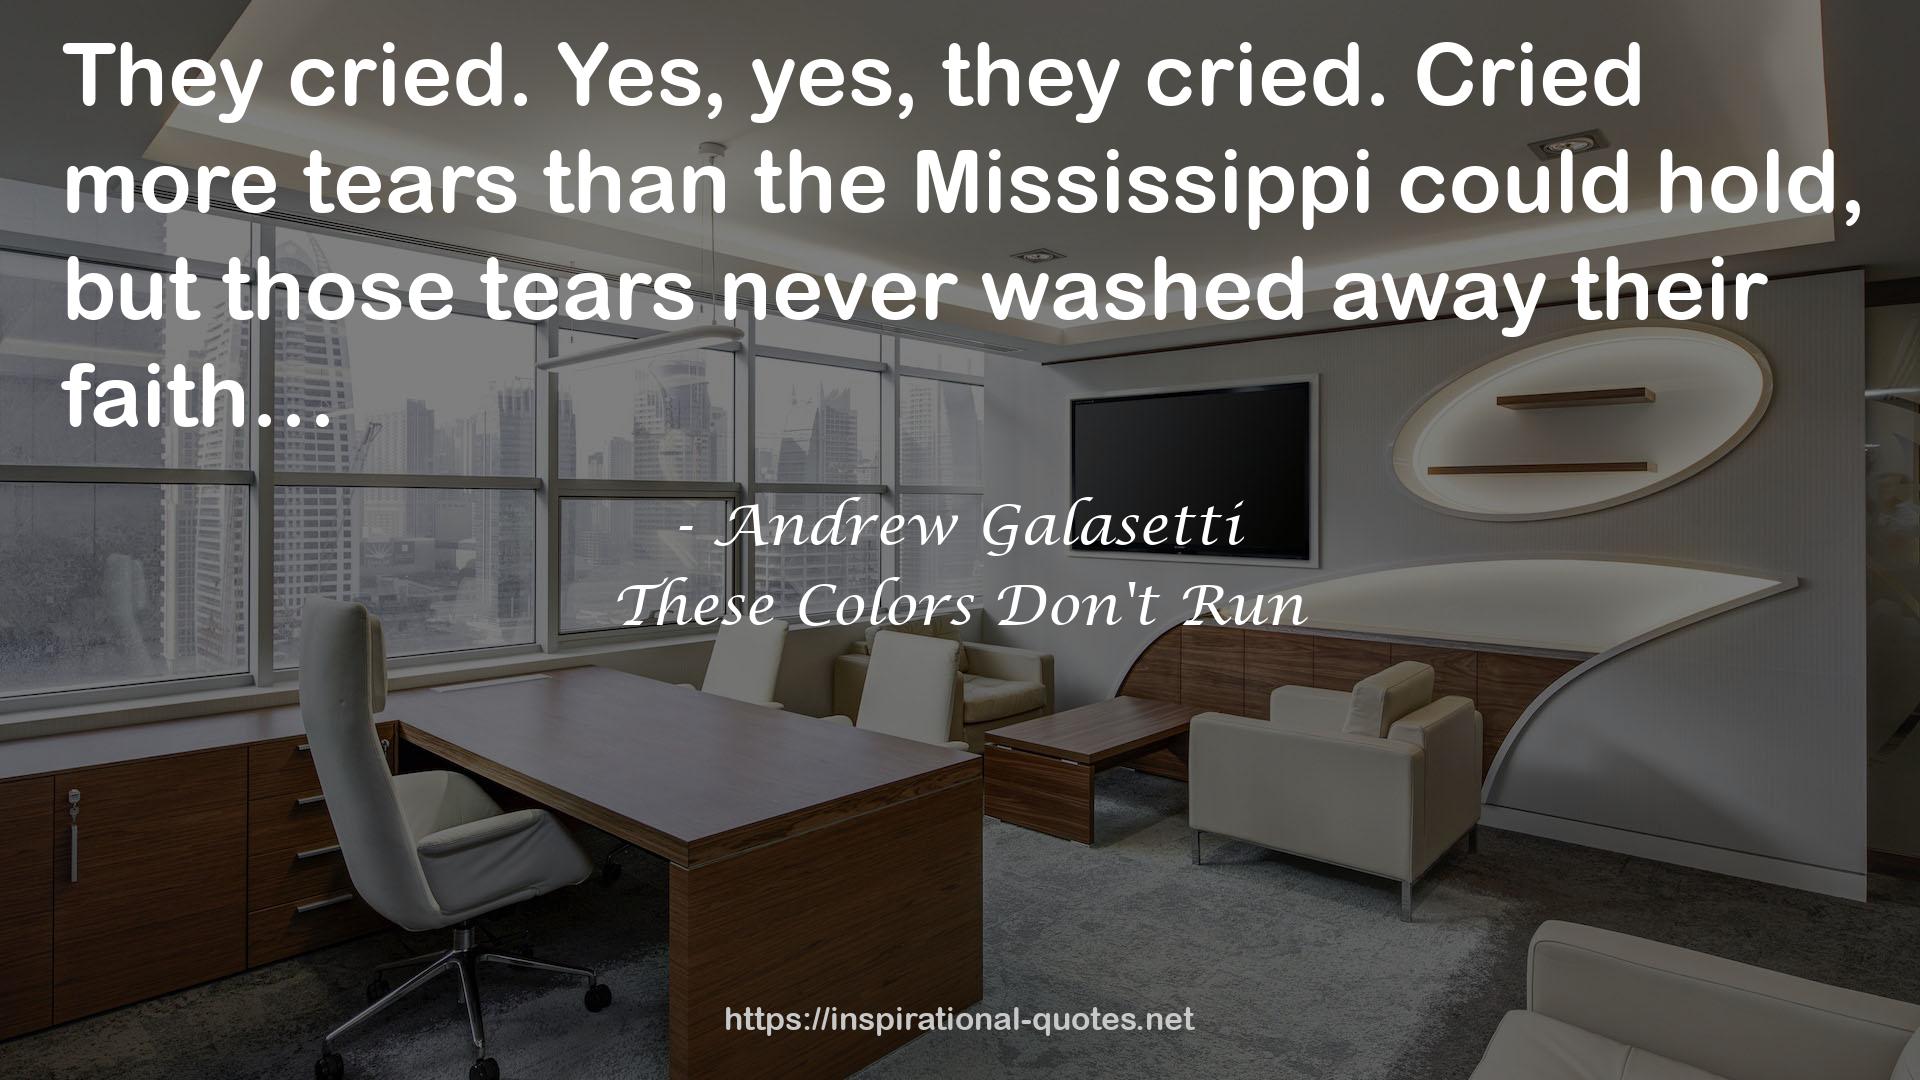 Andrew Galasetti QUOTES